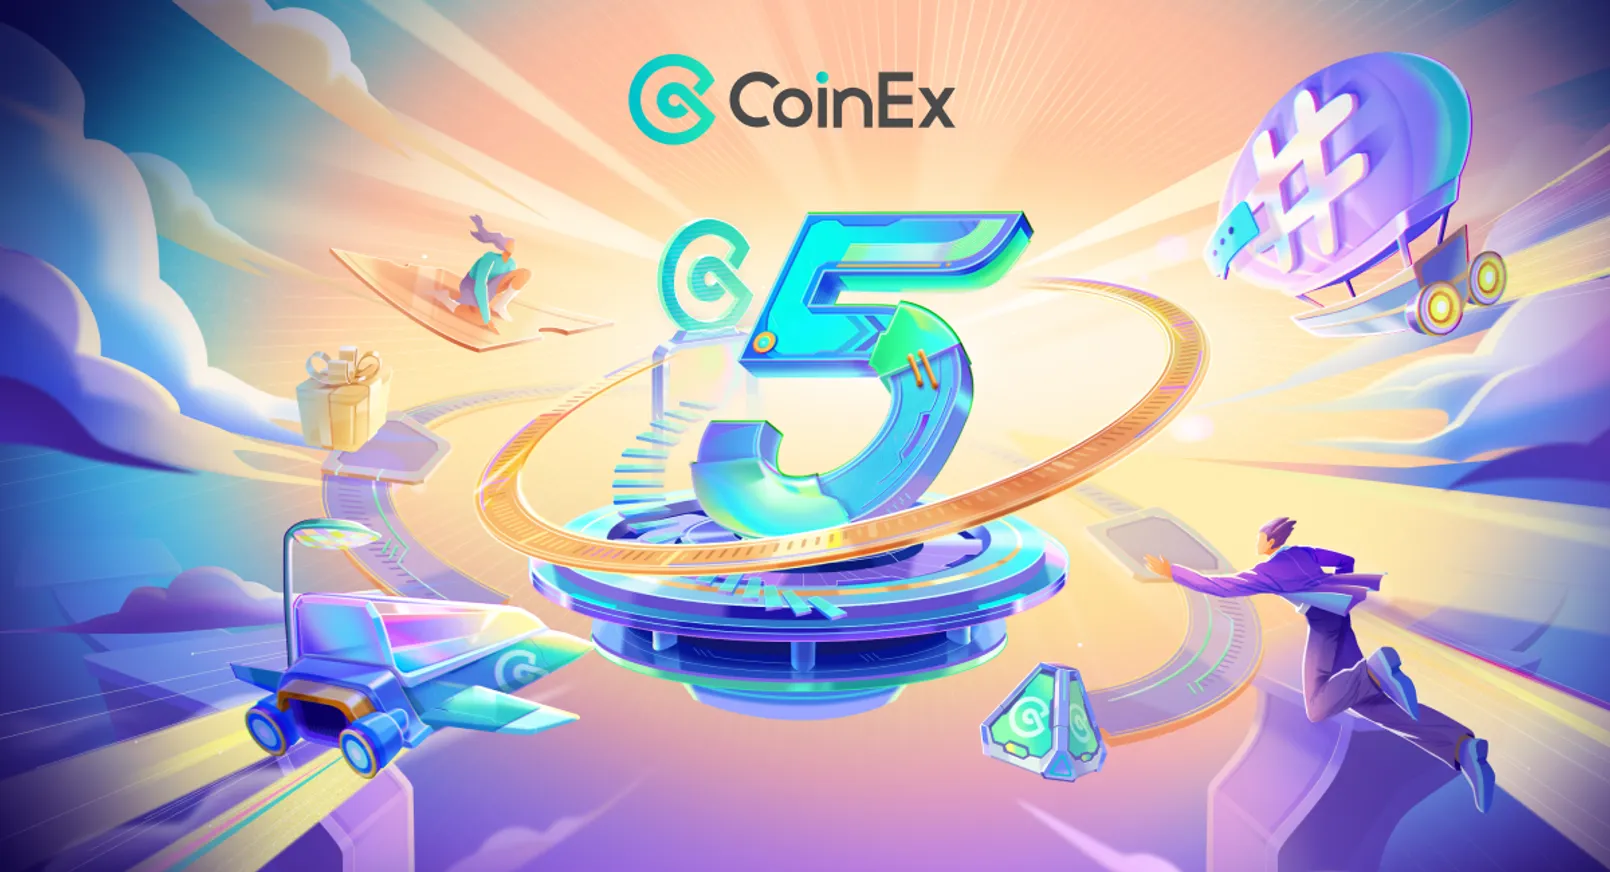 CoinEx To In5inity and Beyond, the Future with You